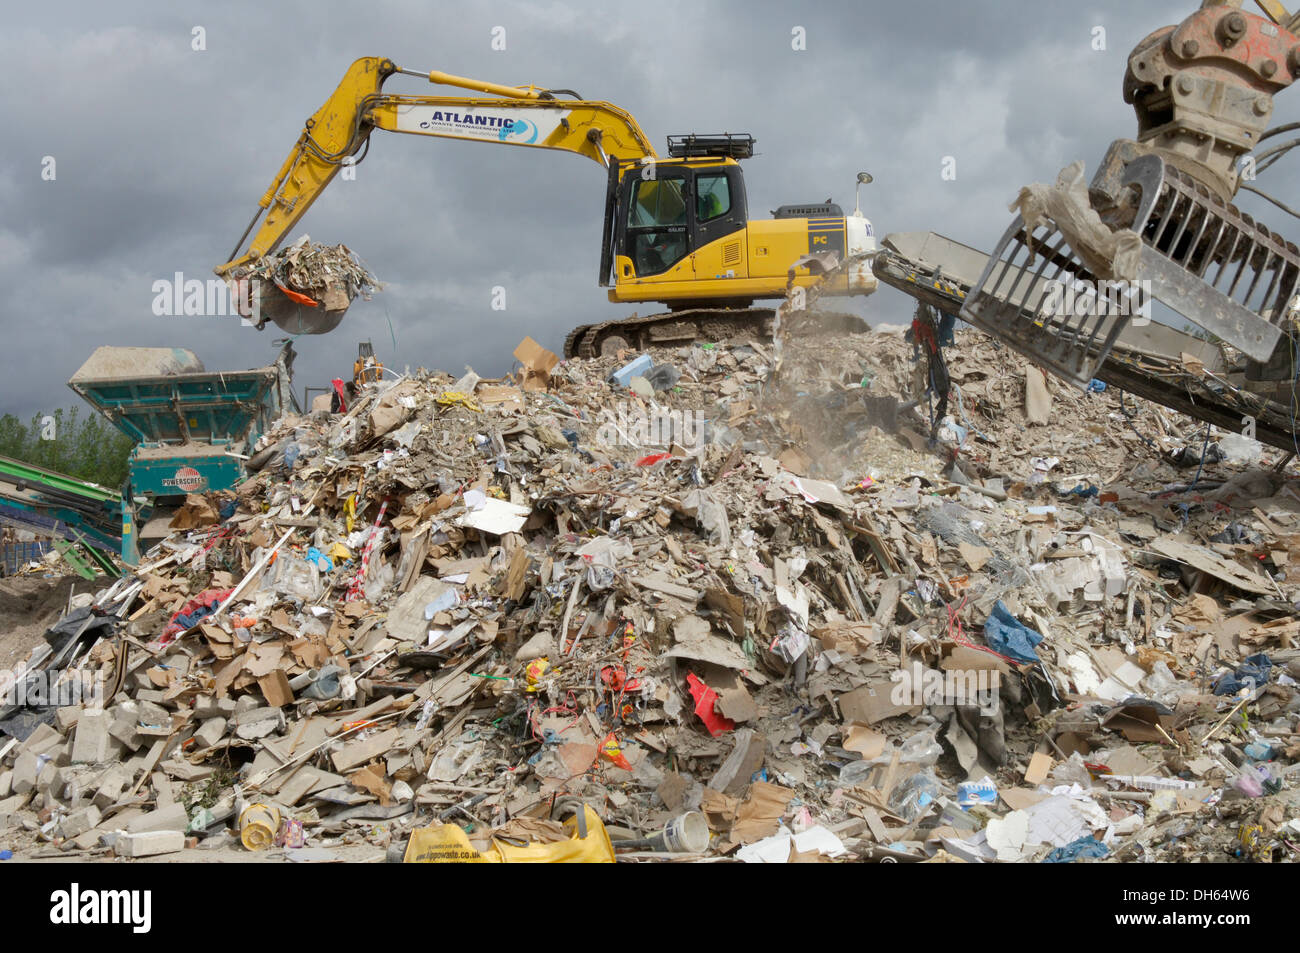 Atlantic Recycling operate a Waste Transfer Station and Recycling Facility for most waste types instead of going to landfill. Stock Photo